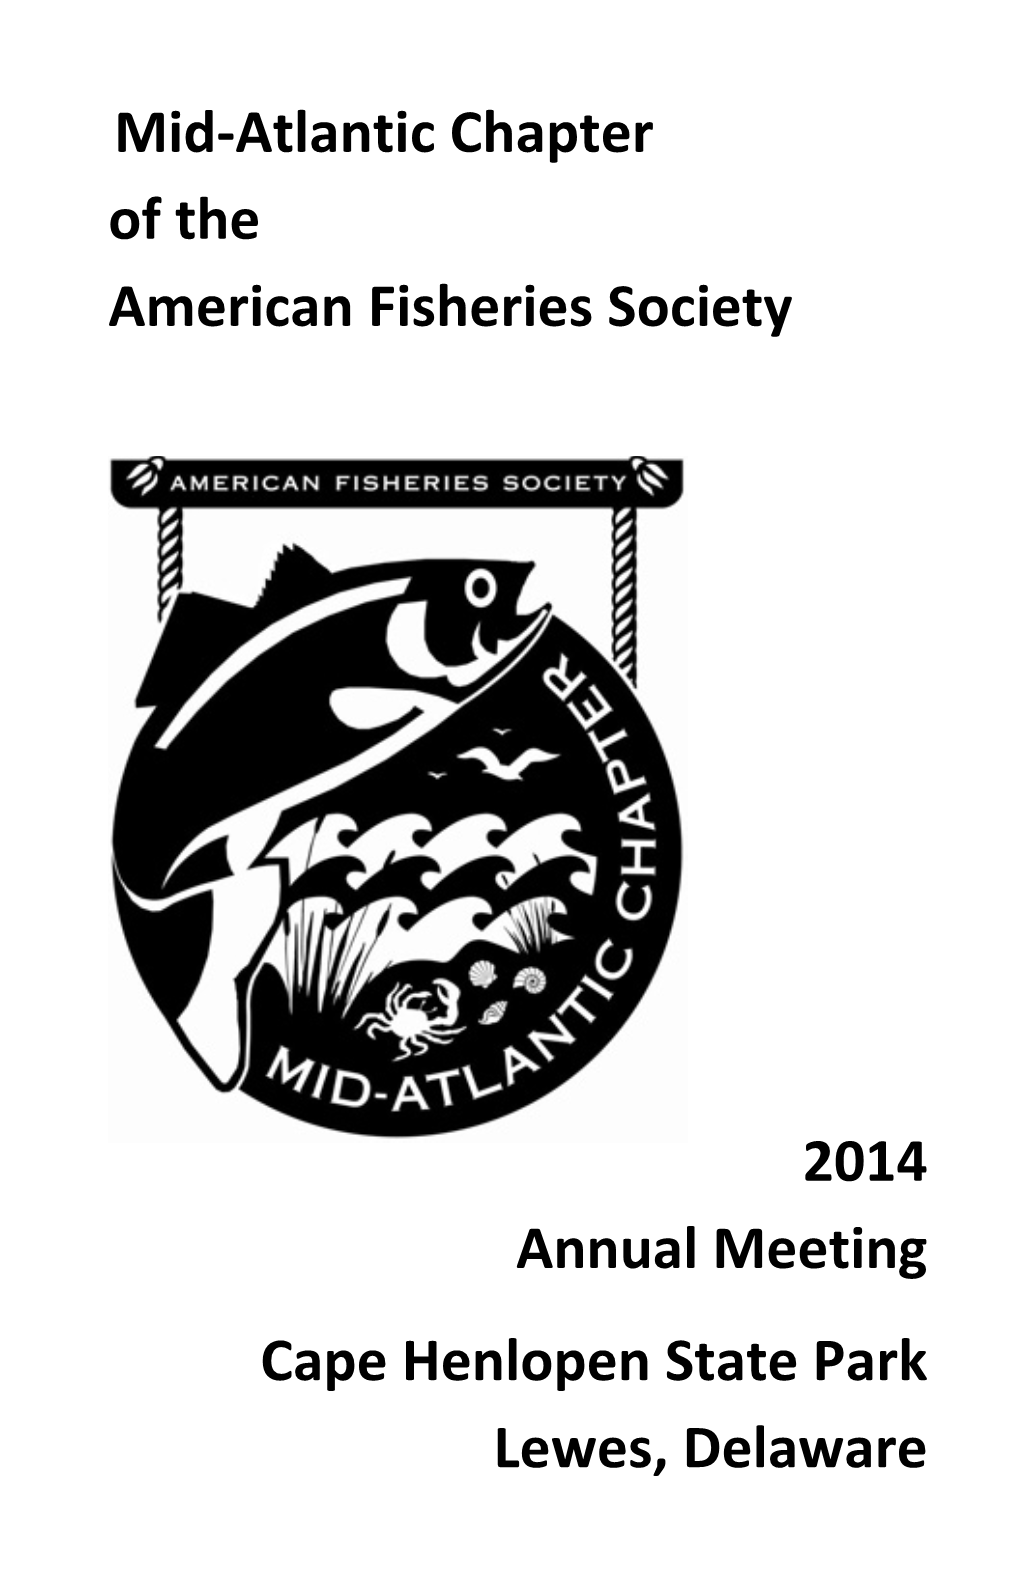 Mid-Atlantic Chapter of the American Fisheries Society 2014 Annual